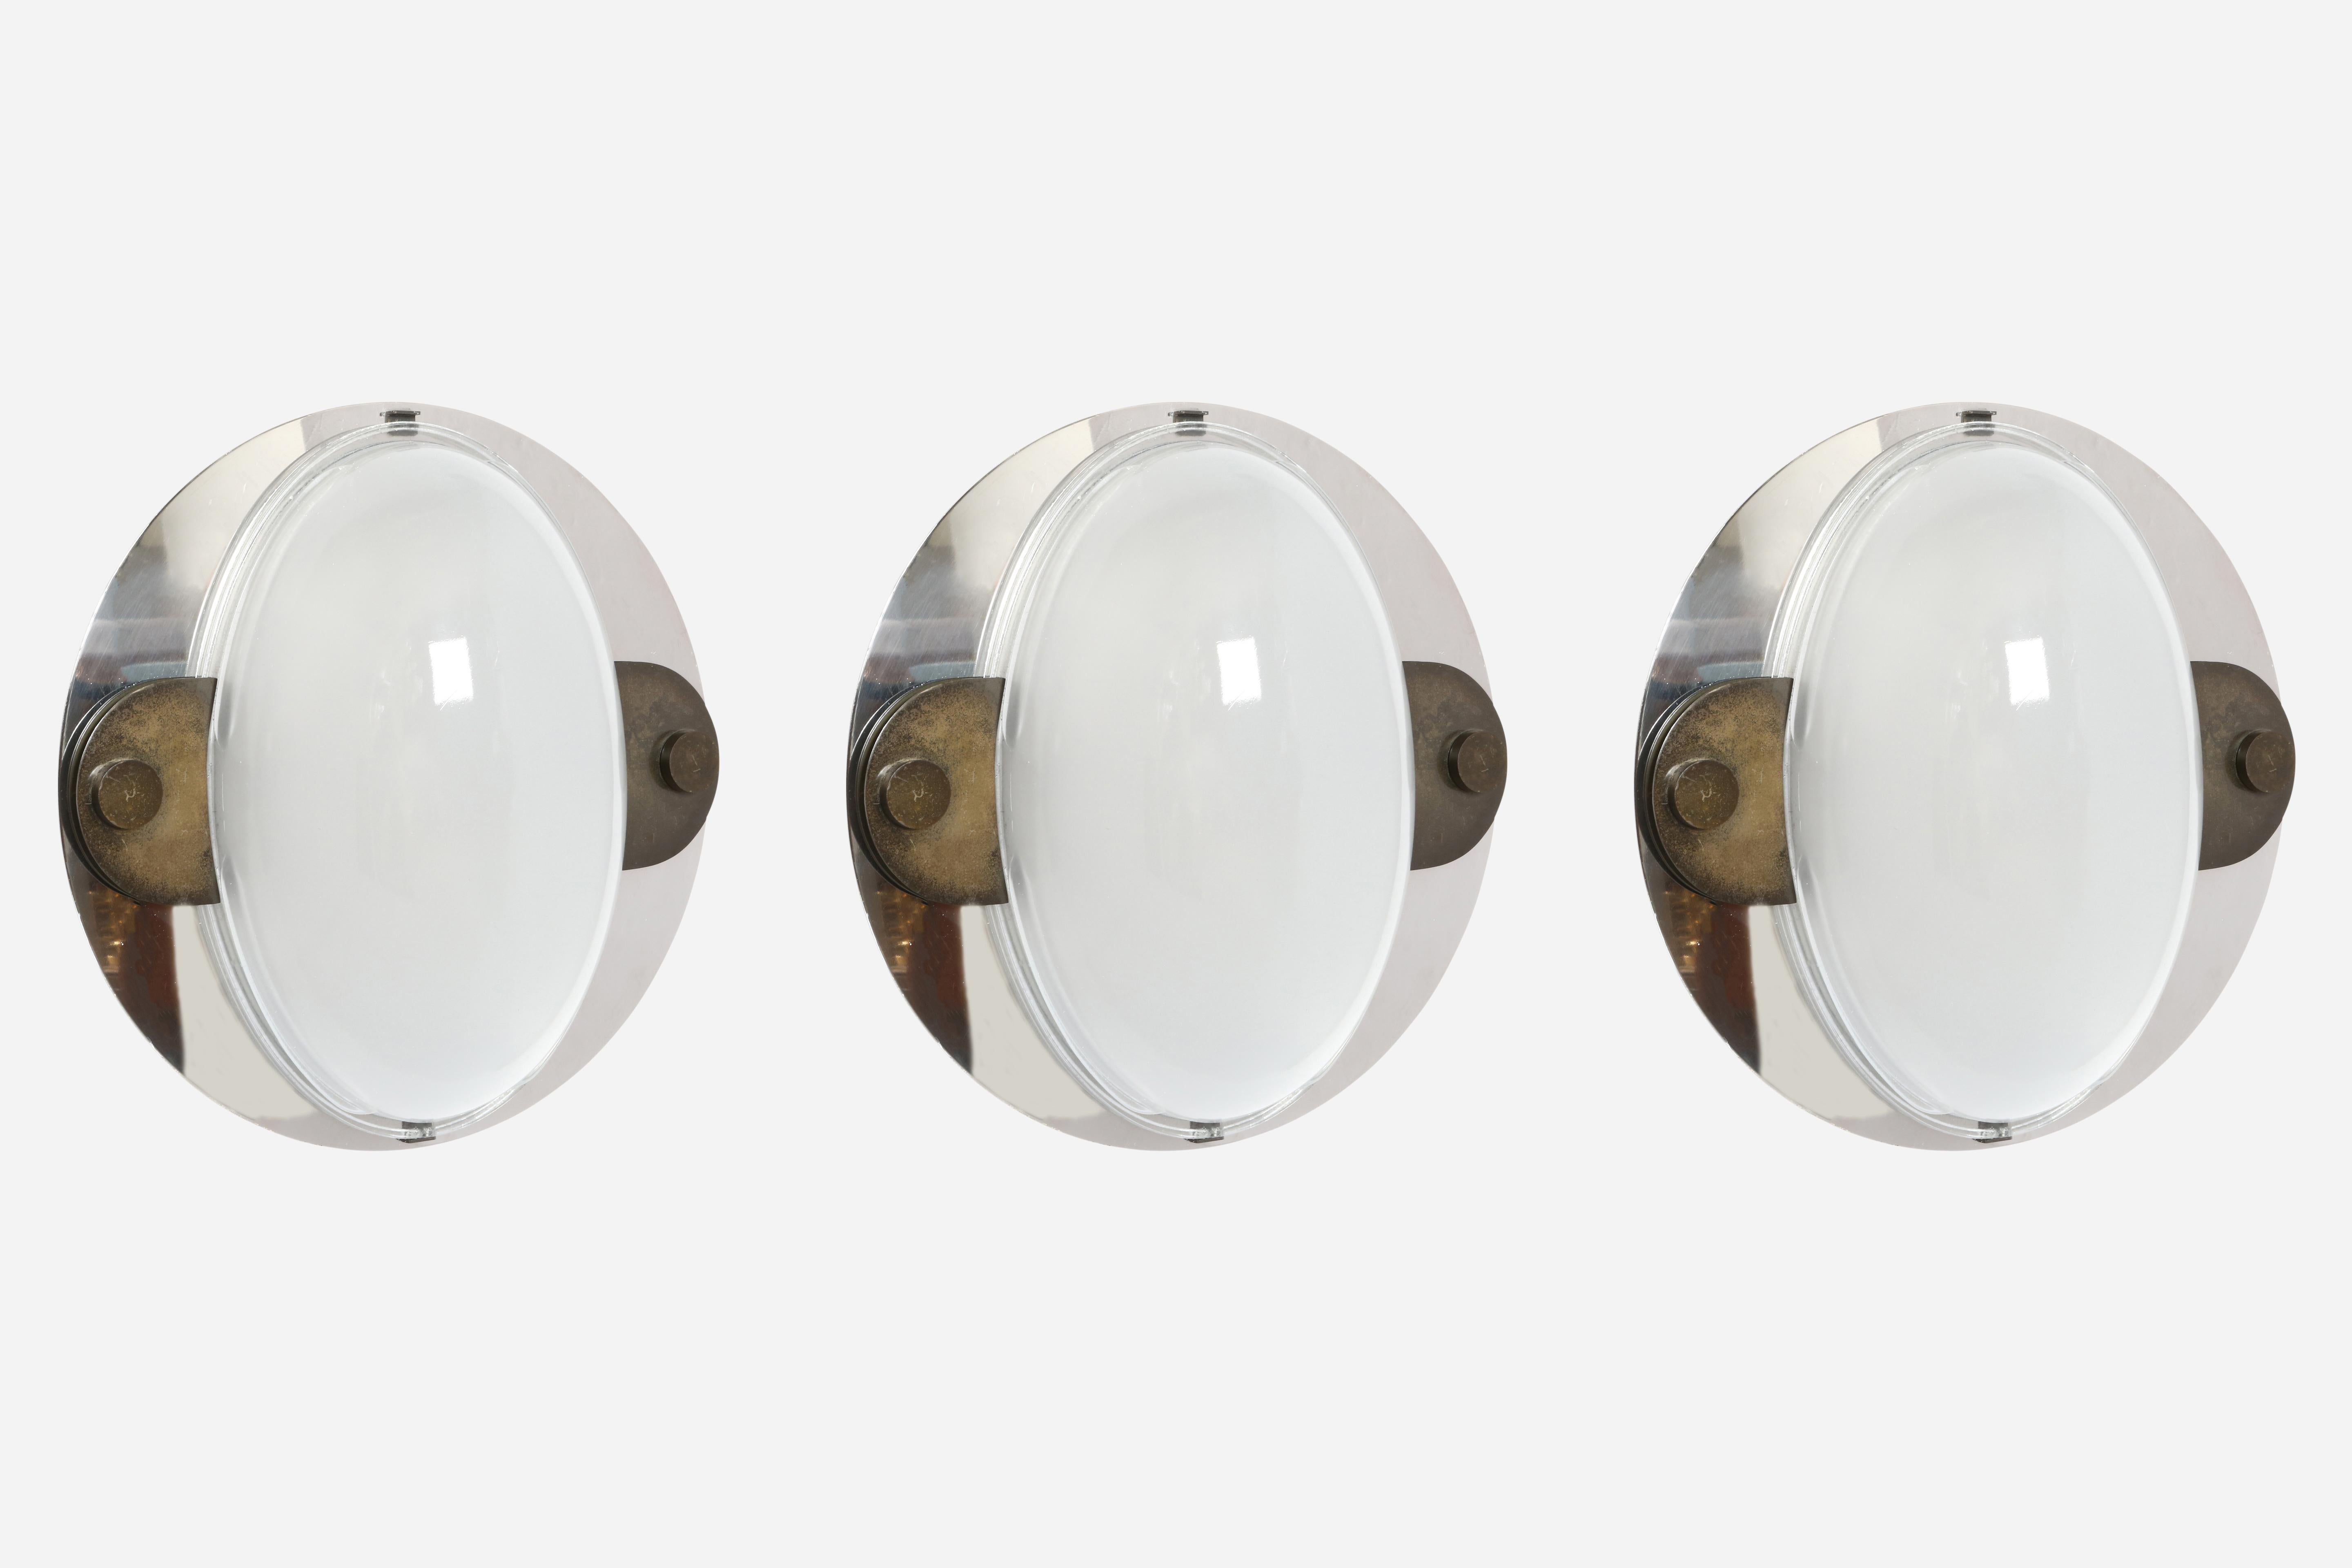 Wall or ceiling lights by Luigi Caccia Dominioni for Azucena.
Designed and manufactured in Italy, 1970s
Rare and impressive.
Holophane glass, chrome plated metal and patinated brass.
Two medium base sockets for each light.
Complimentary US rewiring